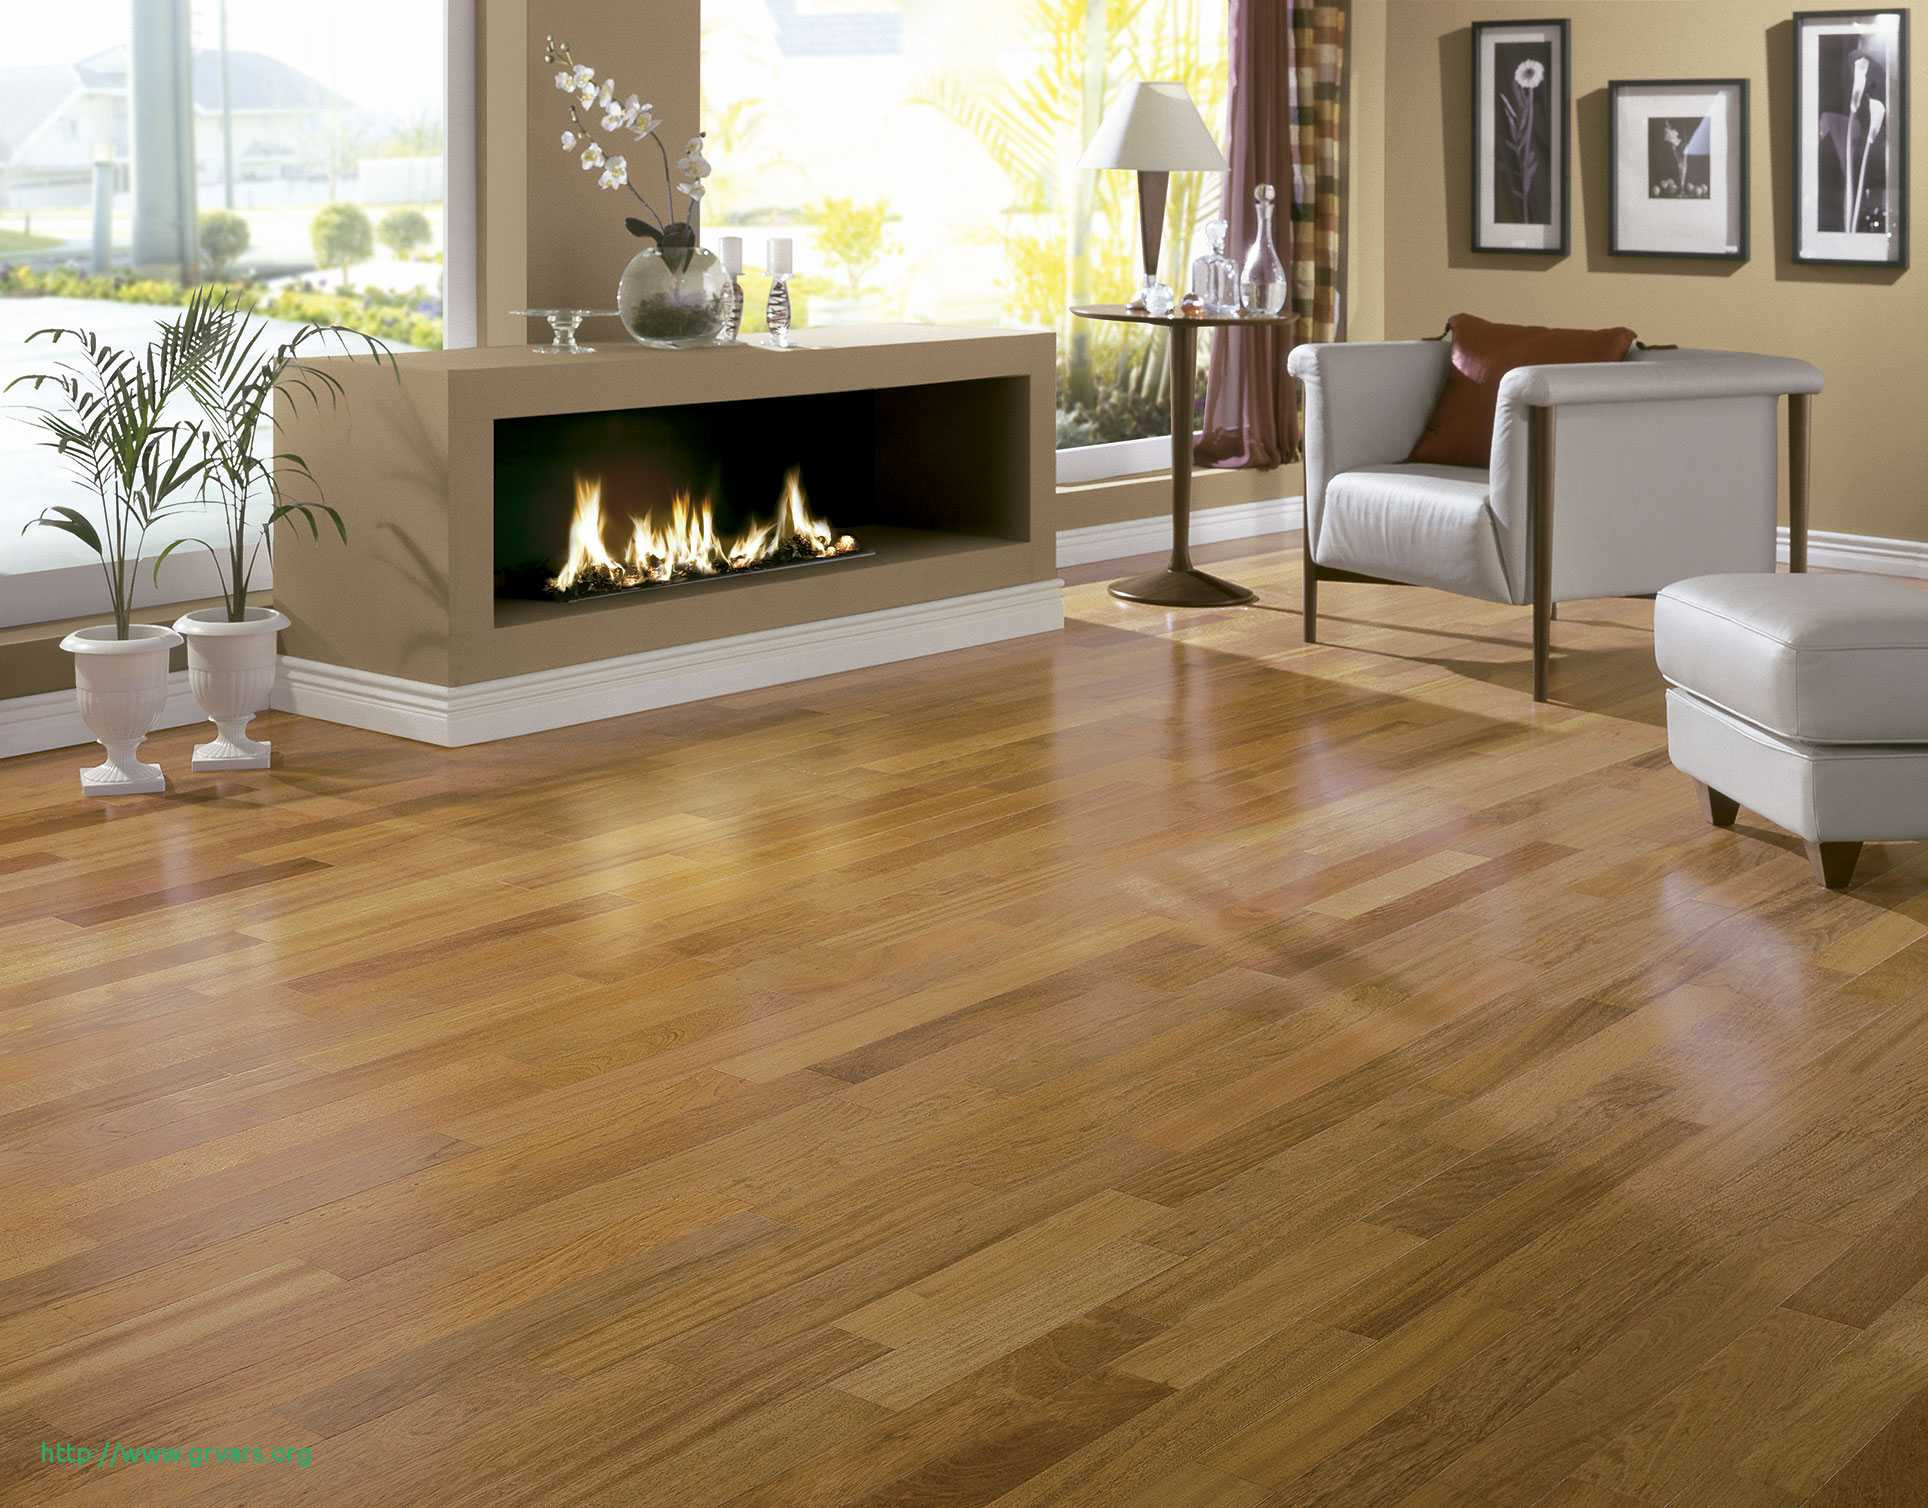 13 Cute Different Types Of Hardwood Floors 2024 free download different types of hardwood floors of 18 beau what type of hardwood floor do i have ideas blog with what type of hardwood floor do i have nouveau engaging discount hardwood flooring 5 where 